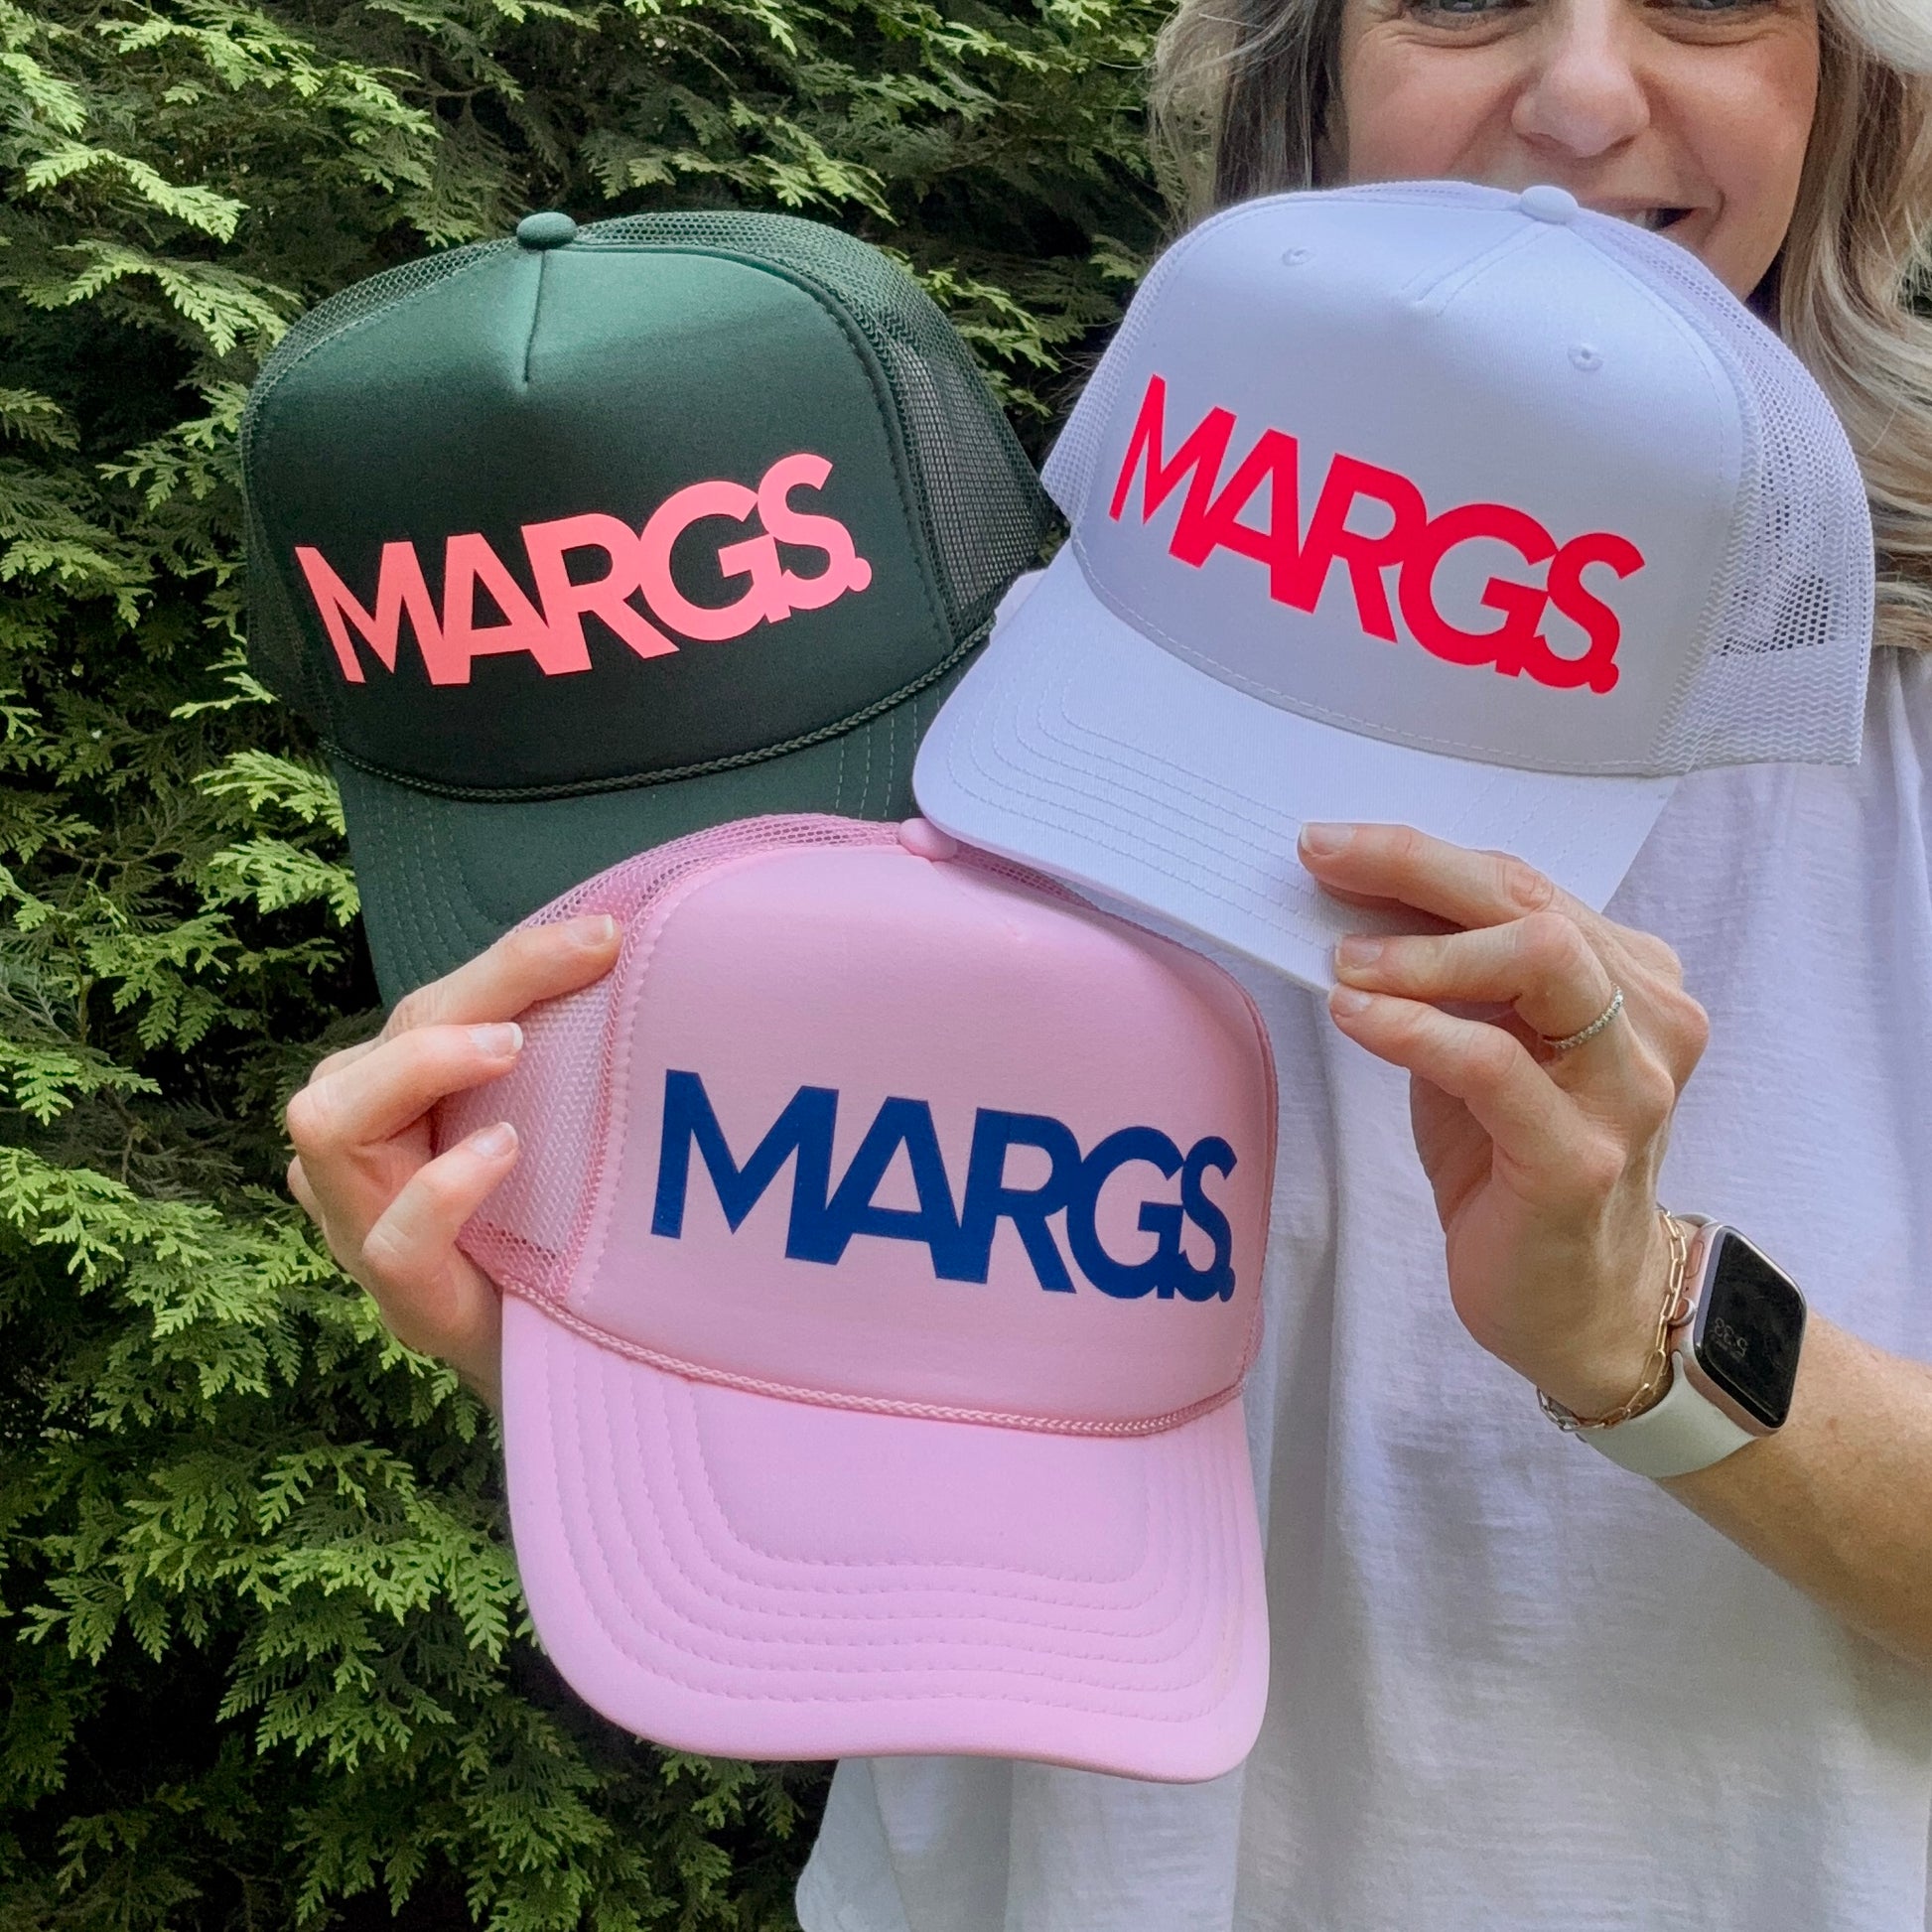 Women's high profile trucker hat with margs print